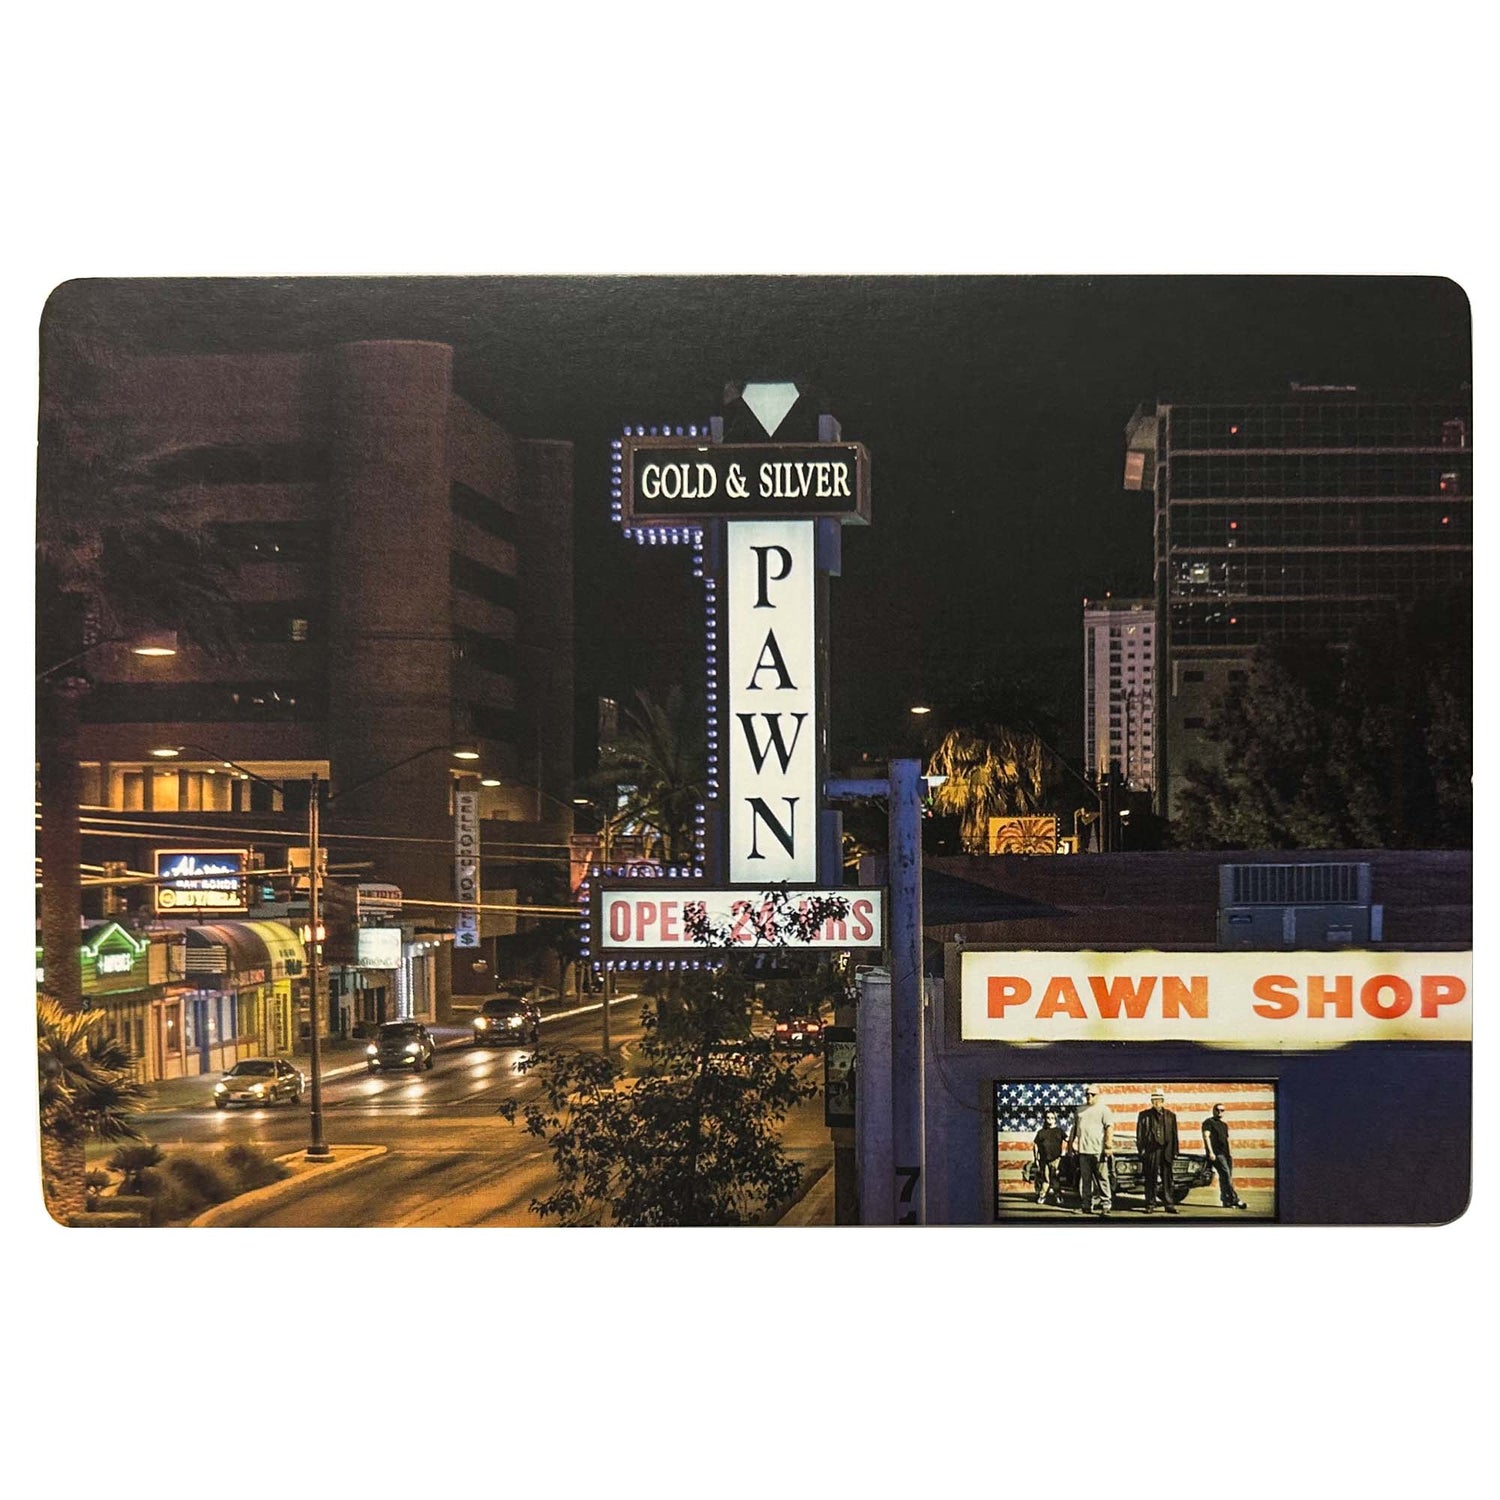 Gold & Silver Pawn Shop Post Cards Night